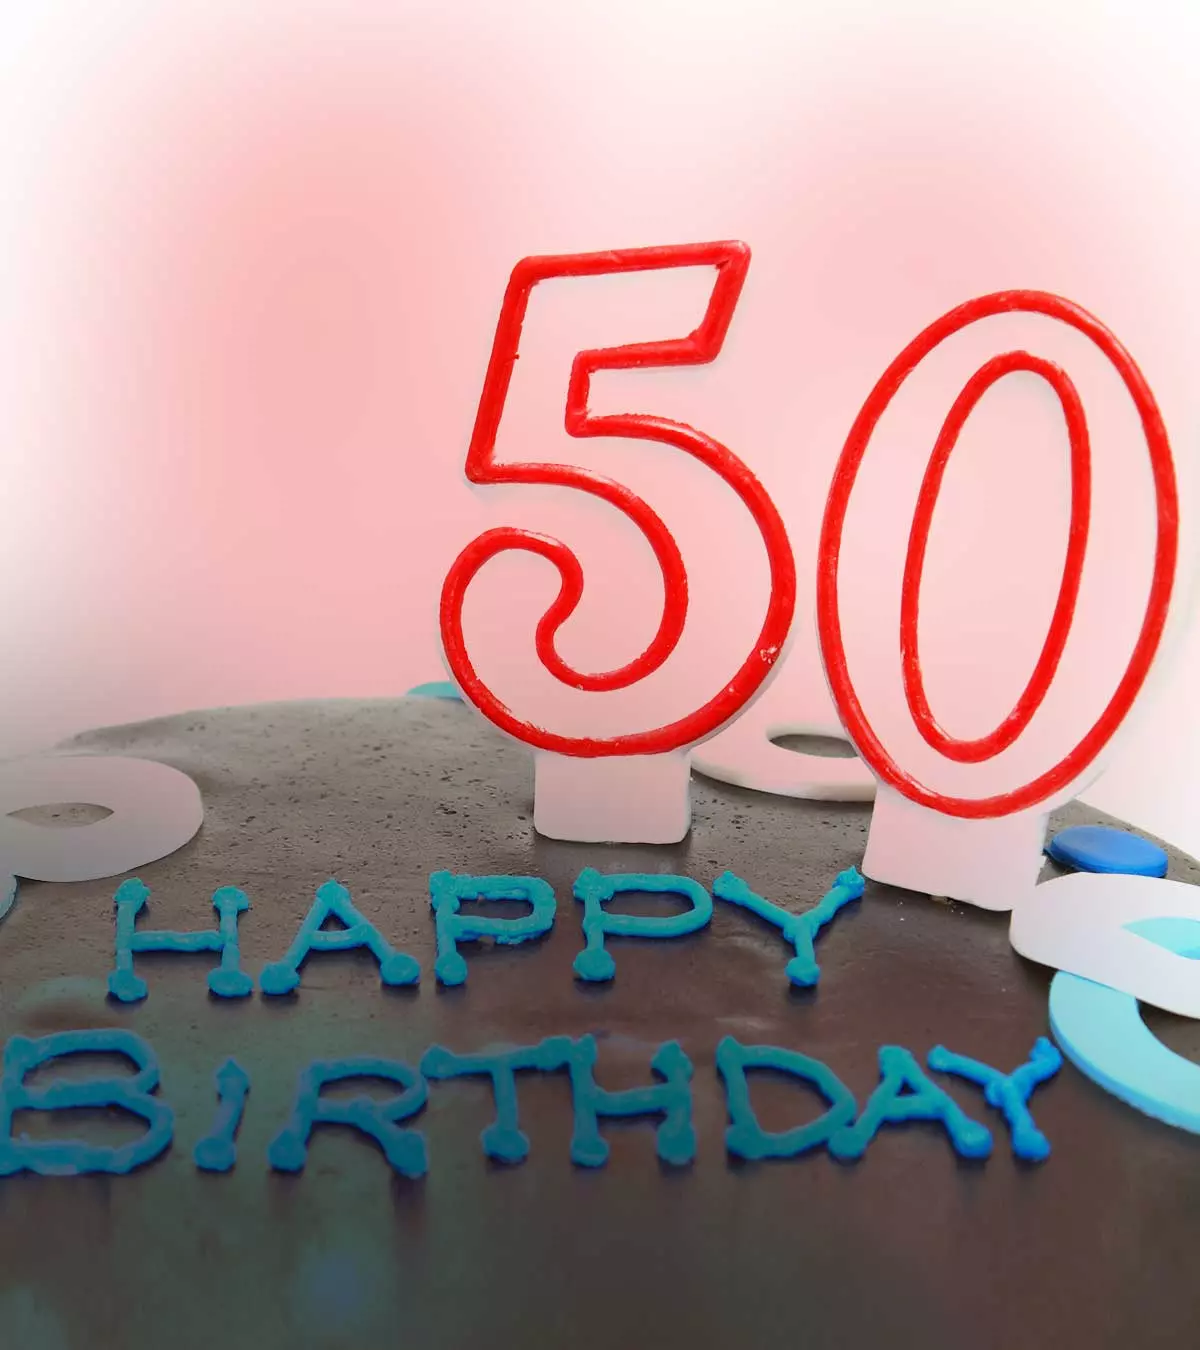 300+ Best 50th Birthday Wishes, Messages, And Quotes